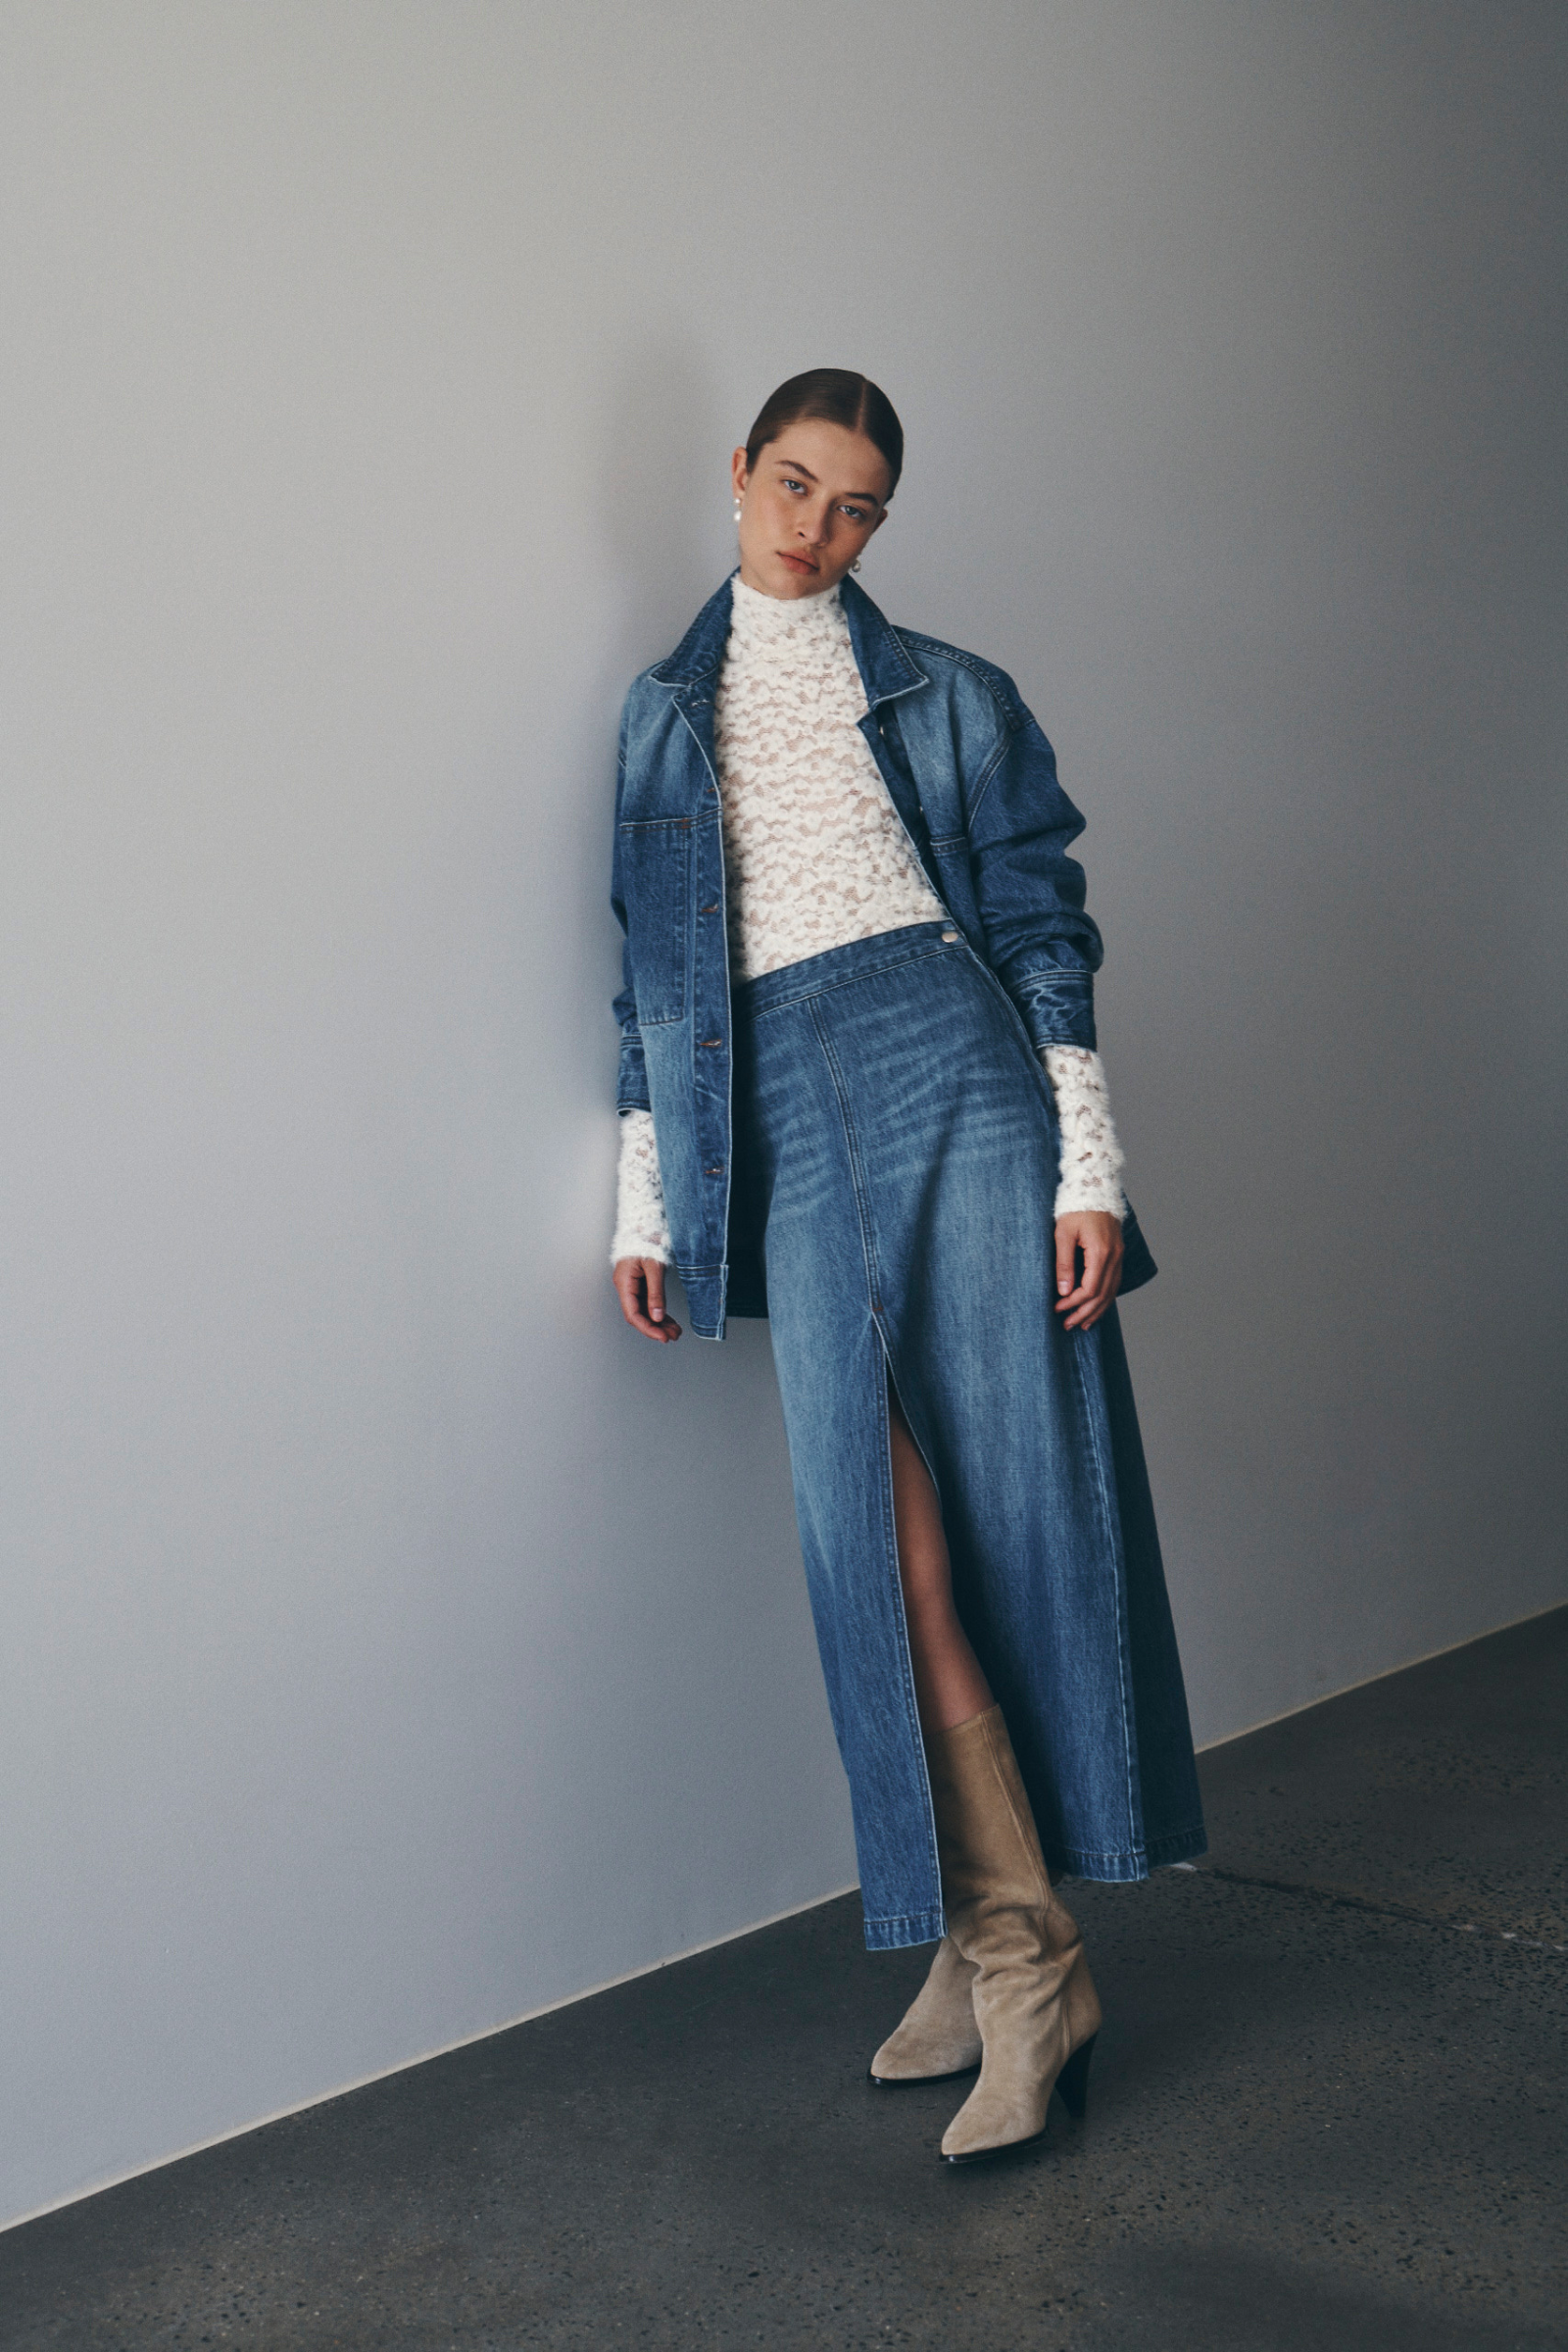 Bianca wears the Iko Relaxed Denim Jacket, Valerie Hemp Midi Skirt, and Galo Lace Fuzzy Top in Creme. All pieces are from ROWIE The Label’s Autumn / Winter ’24 Collection. Bianca styles the look with brown suede knee-high boots.